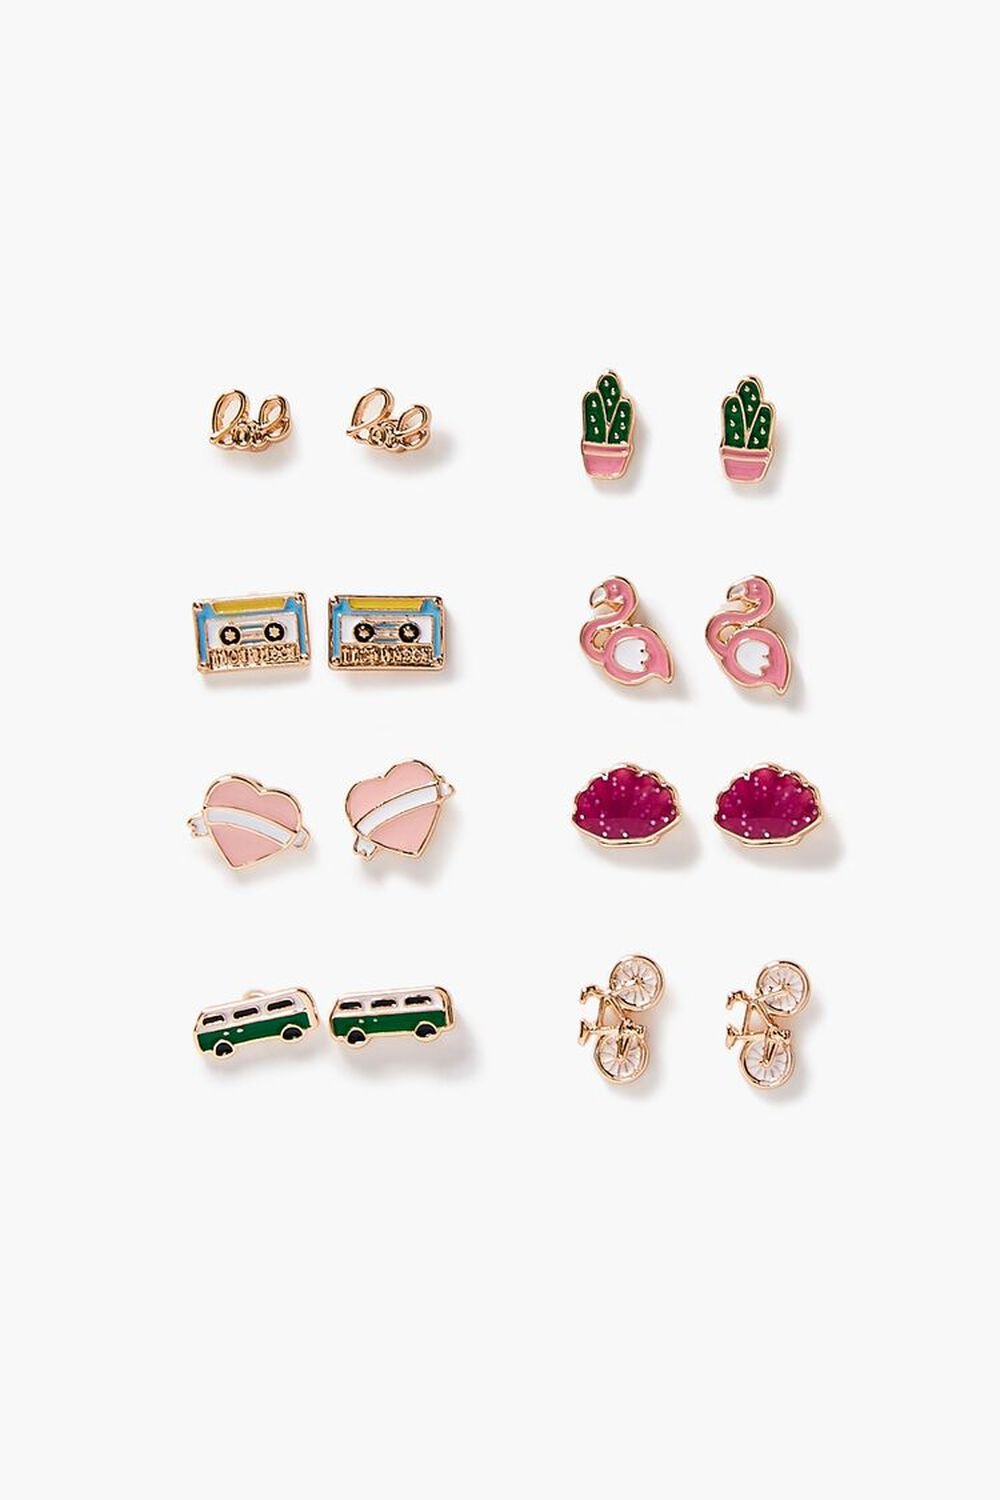 GOLD/PINK Variety Stud Earring Set, image 1